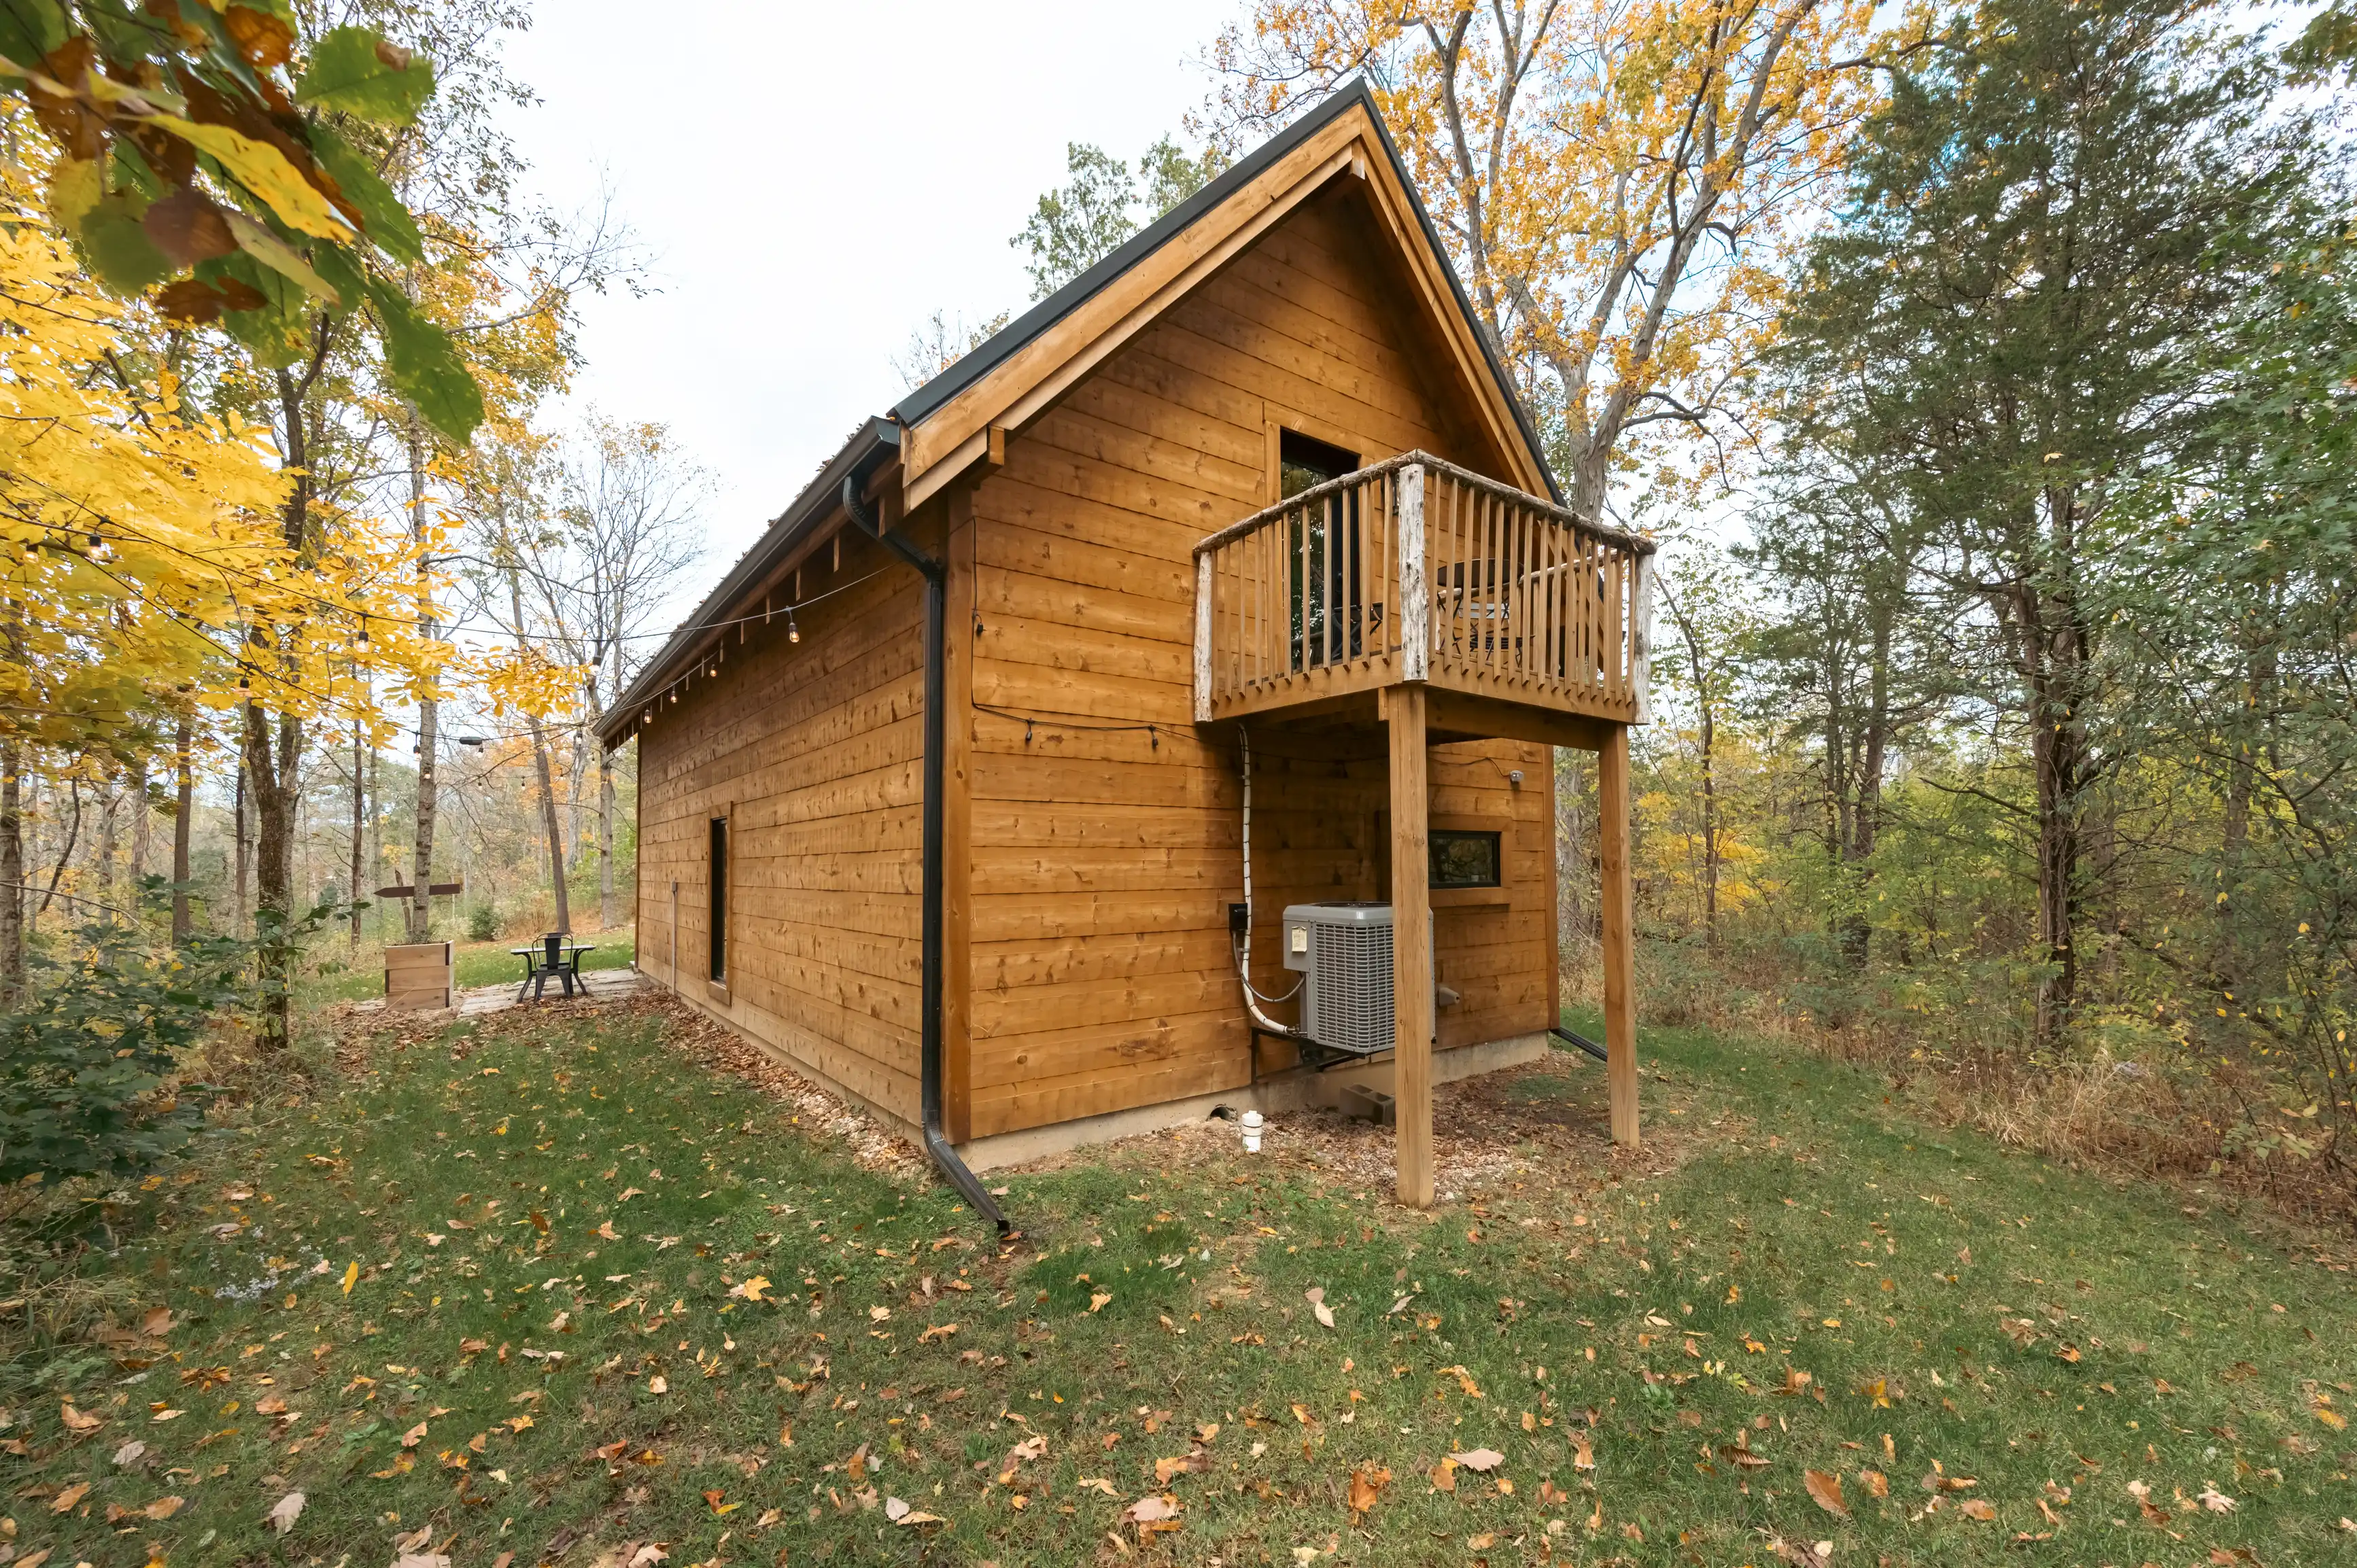 A wooden cabin with a balcony amidst autumn foliage, with a picnic table and chairs on the lush green grass.